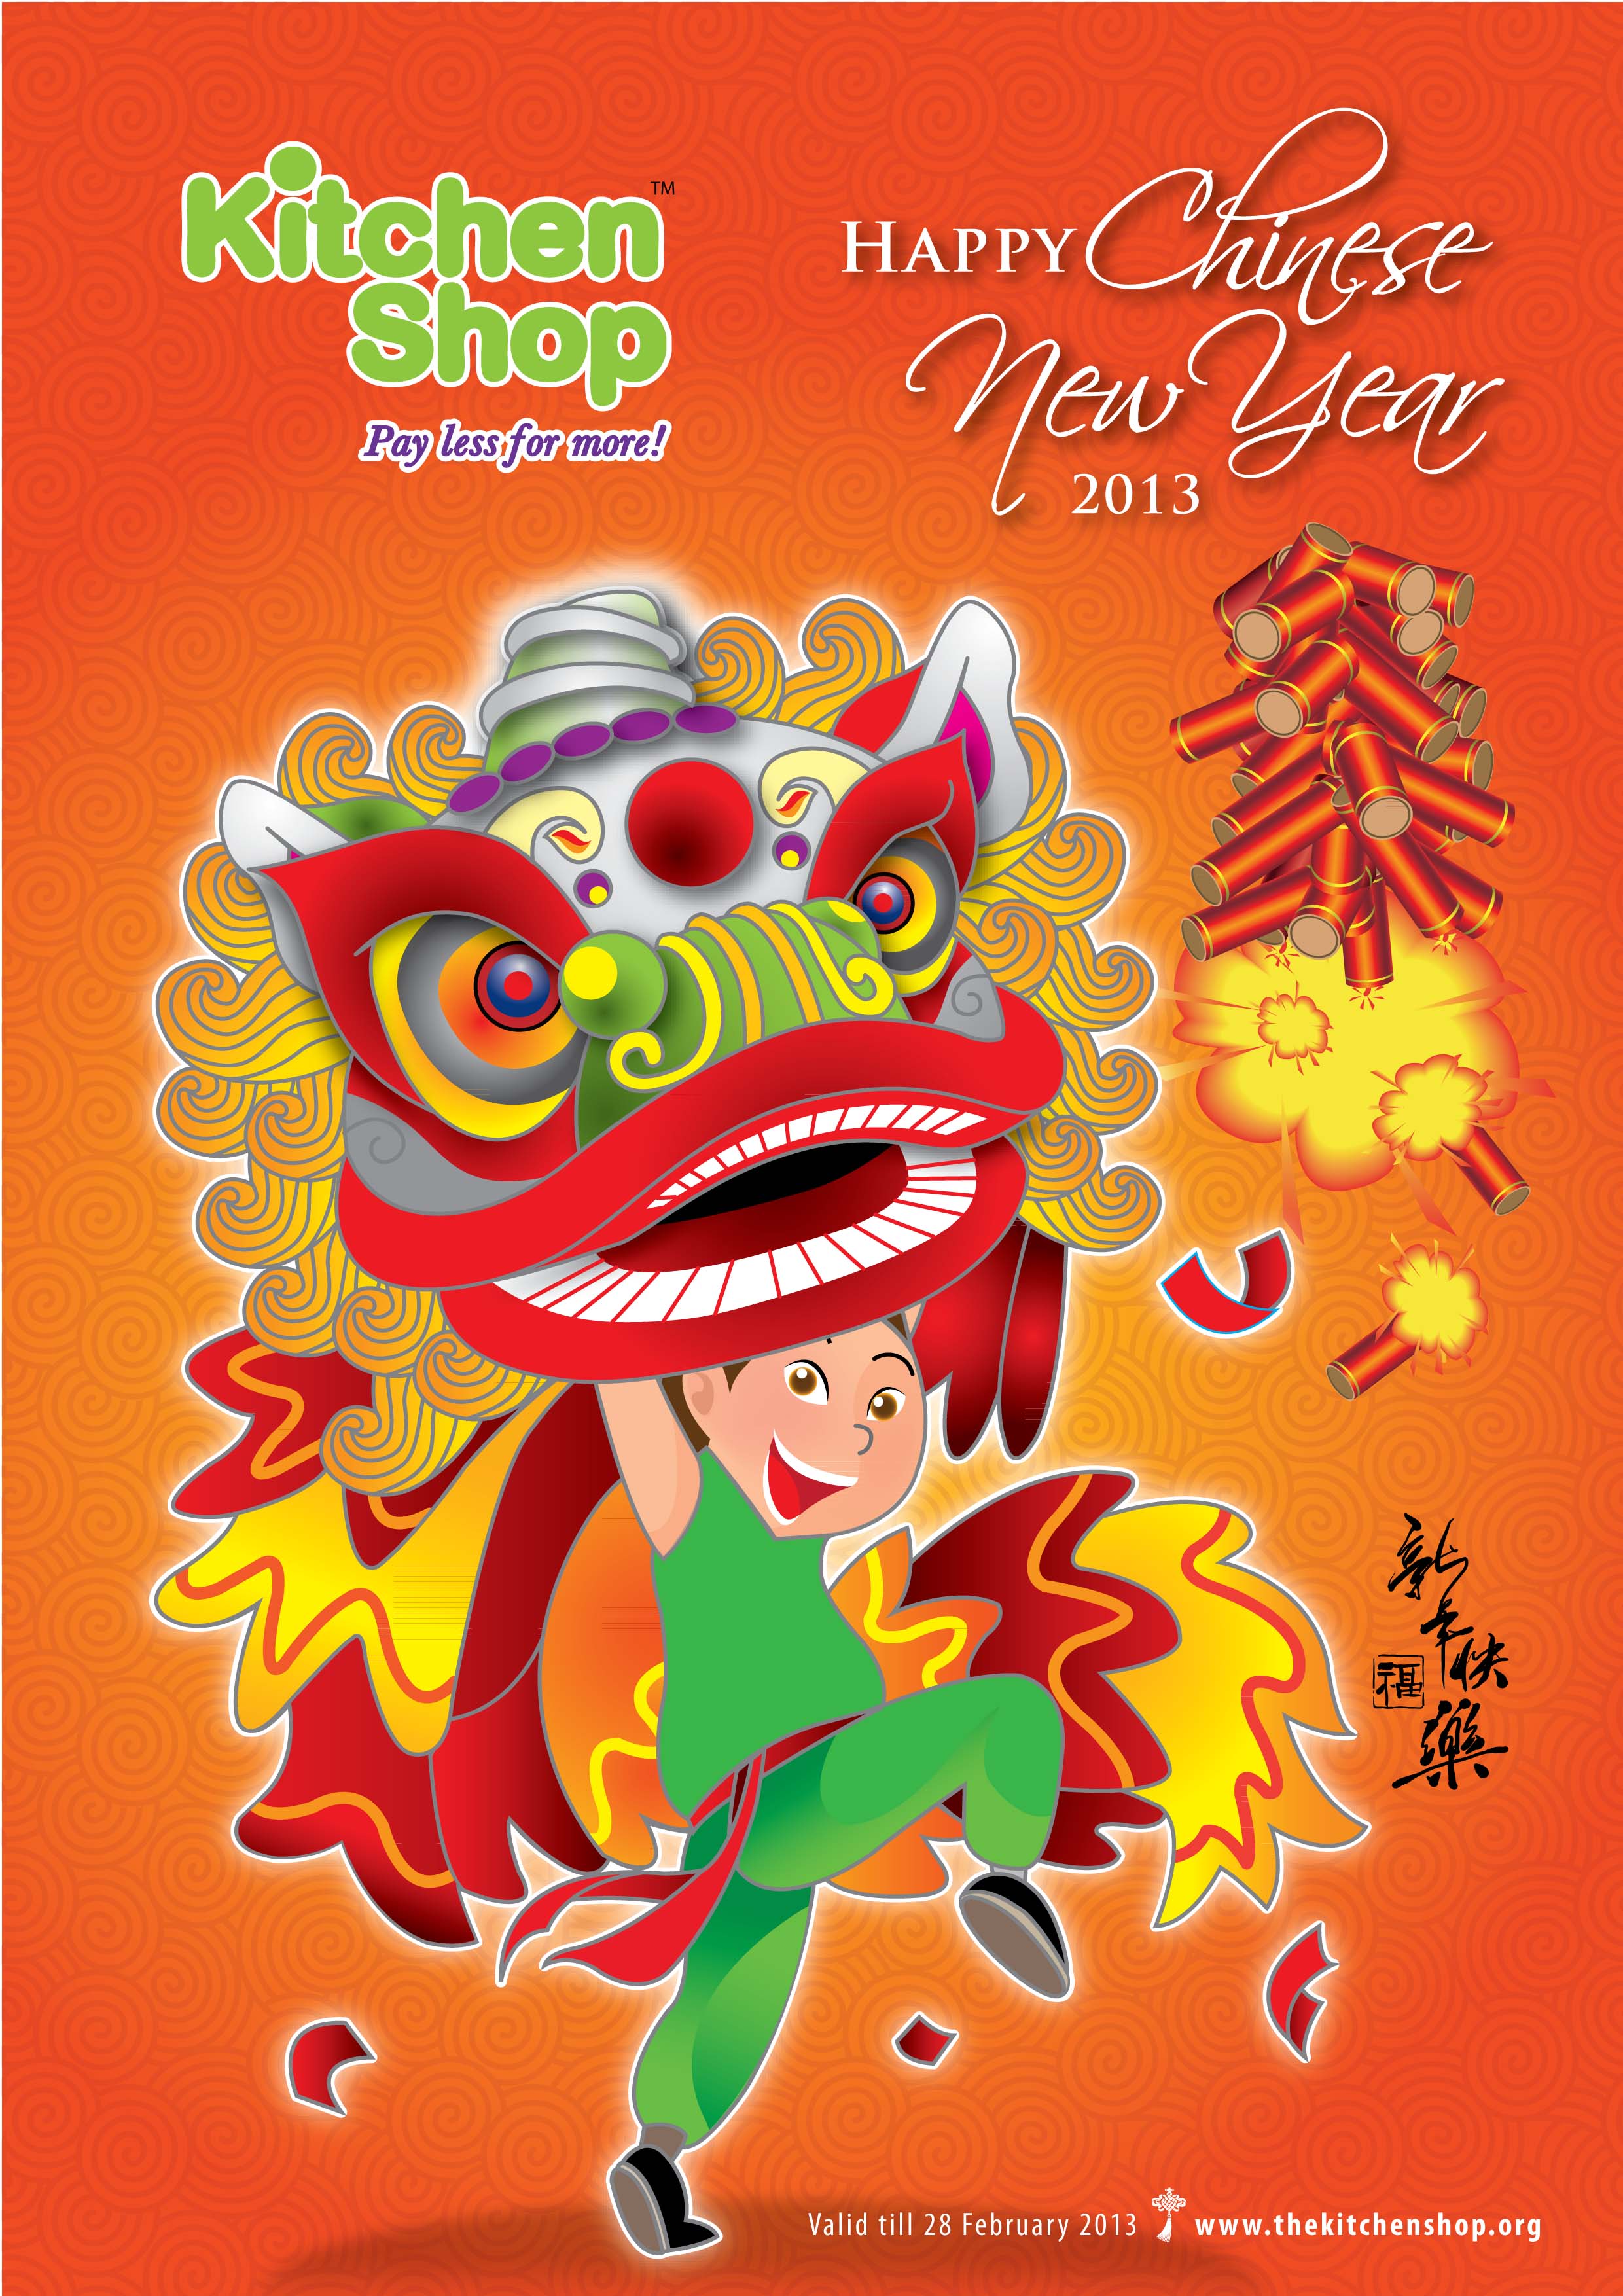 Kitchen Shop Chinese New Year 2013 Promotion